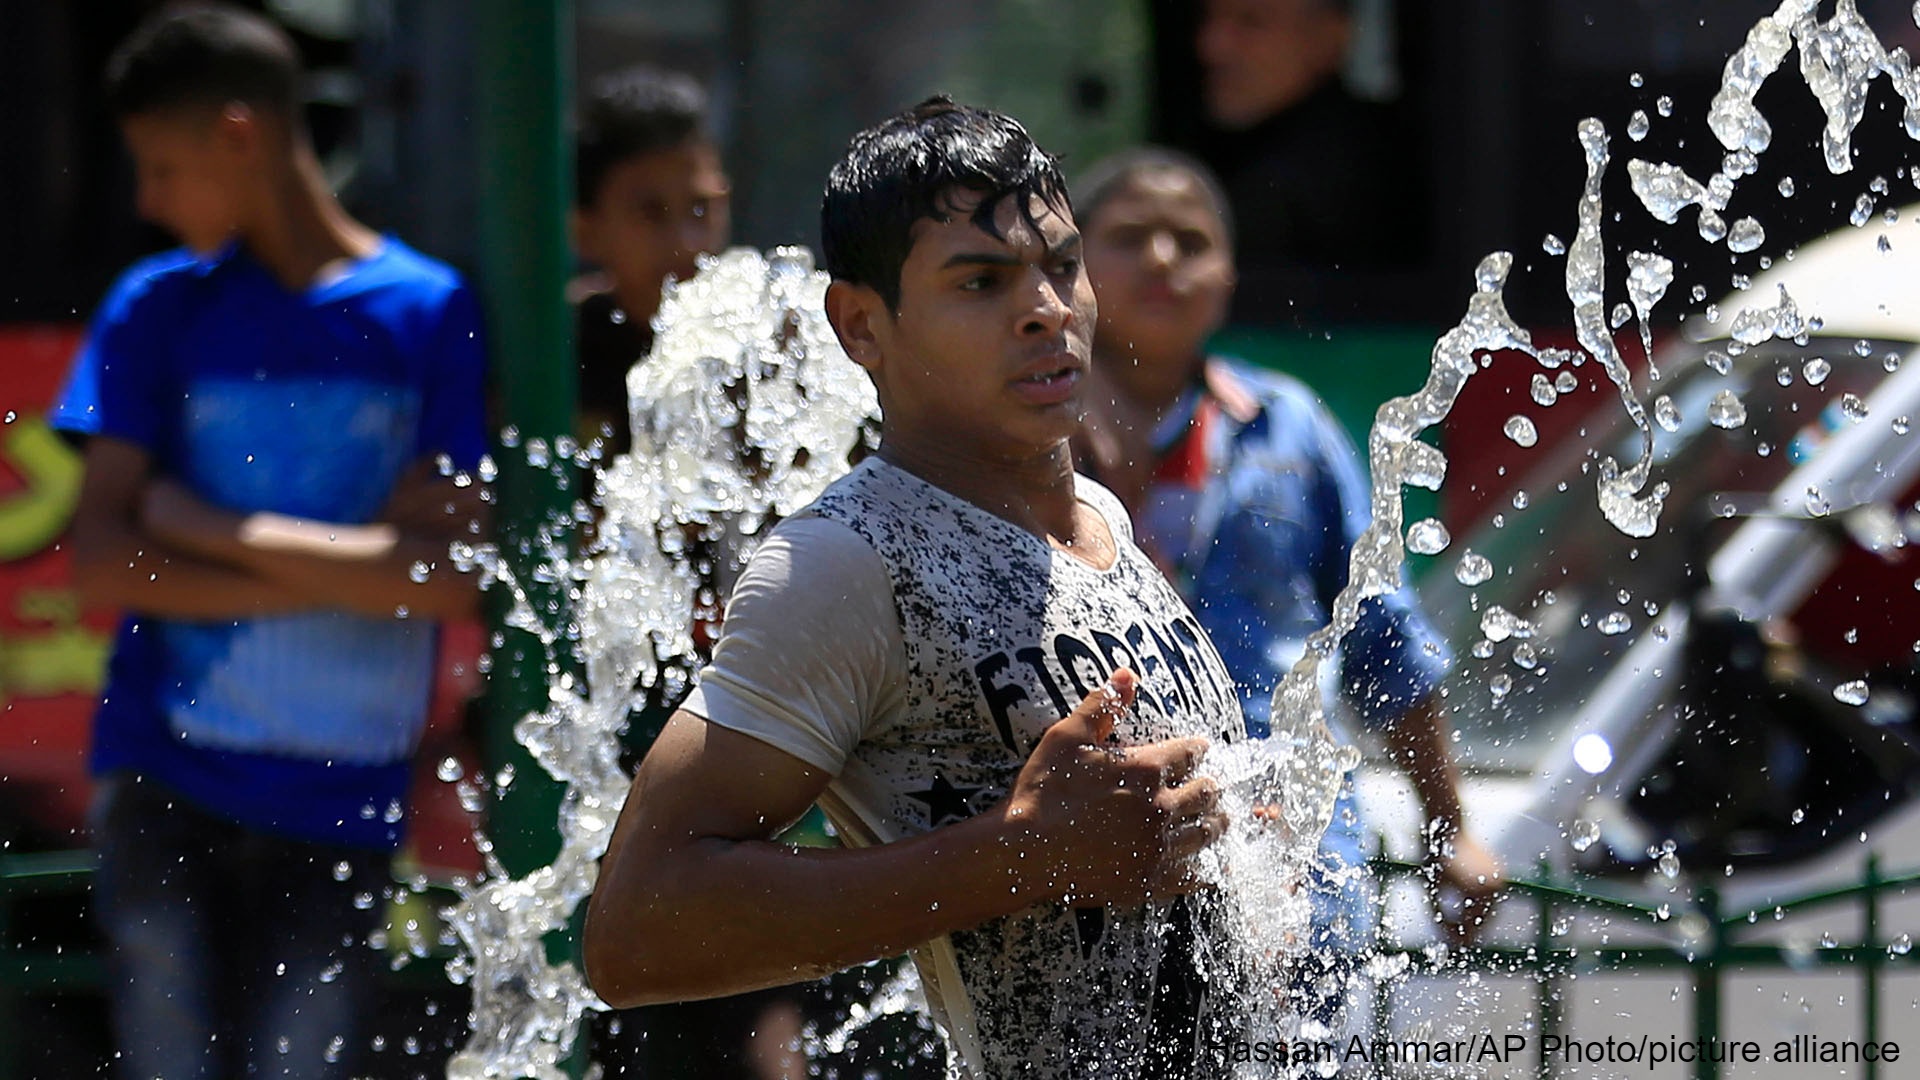 An Egyptian cools off in a public fountain in Giza, Egypt (photo: Hassan Ammar/AP Photo/picture alliance)